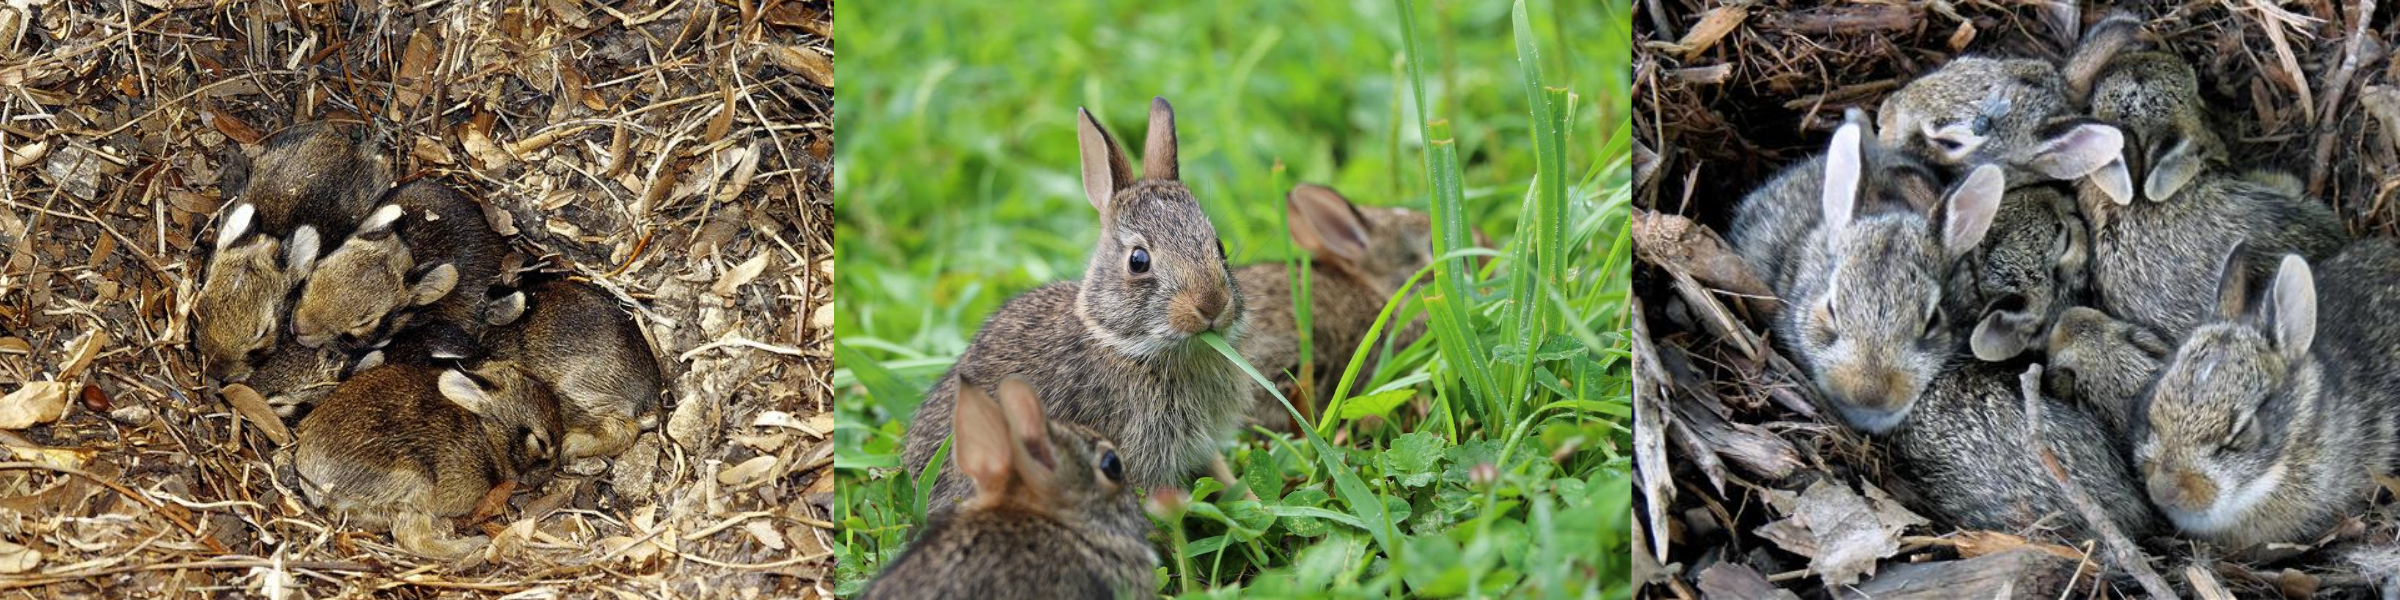 What to do if you find a nest of baby rabbits via Mountain WILD